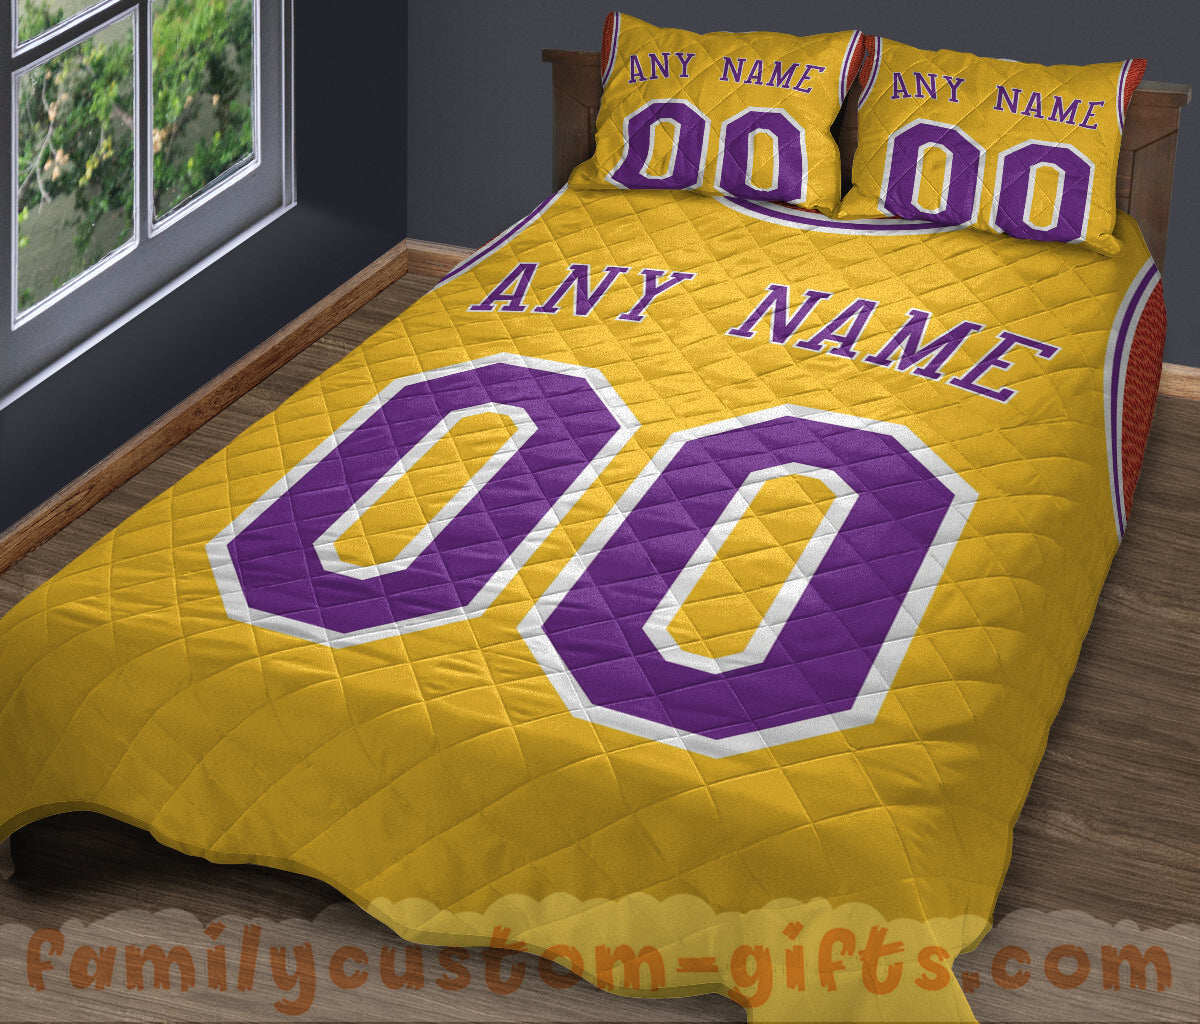 Custom Quilt Sets Los Angeles Jersey Personalized Basketball Premium Quilt Bedding for Men Women